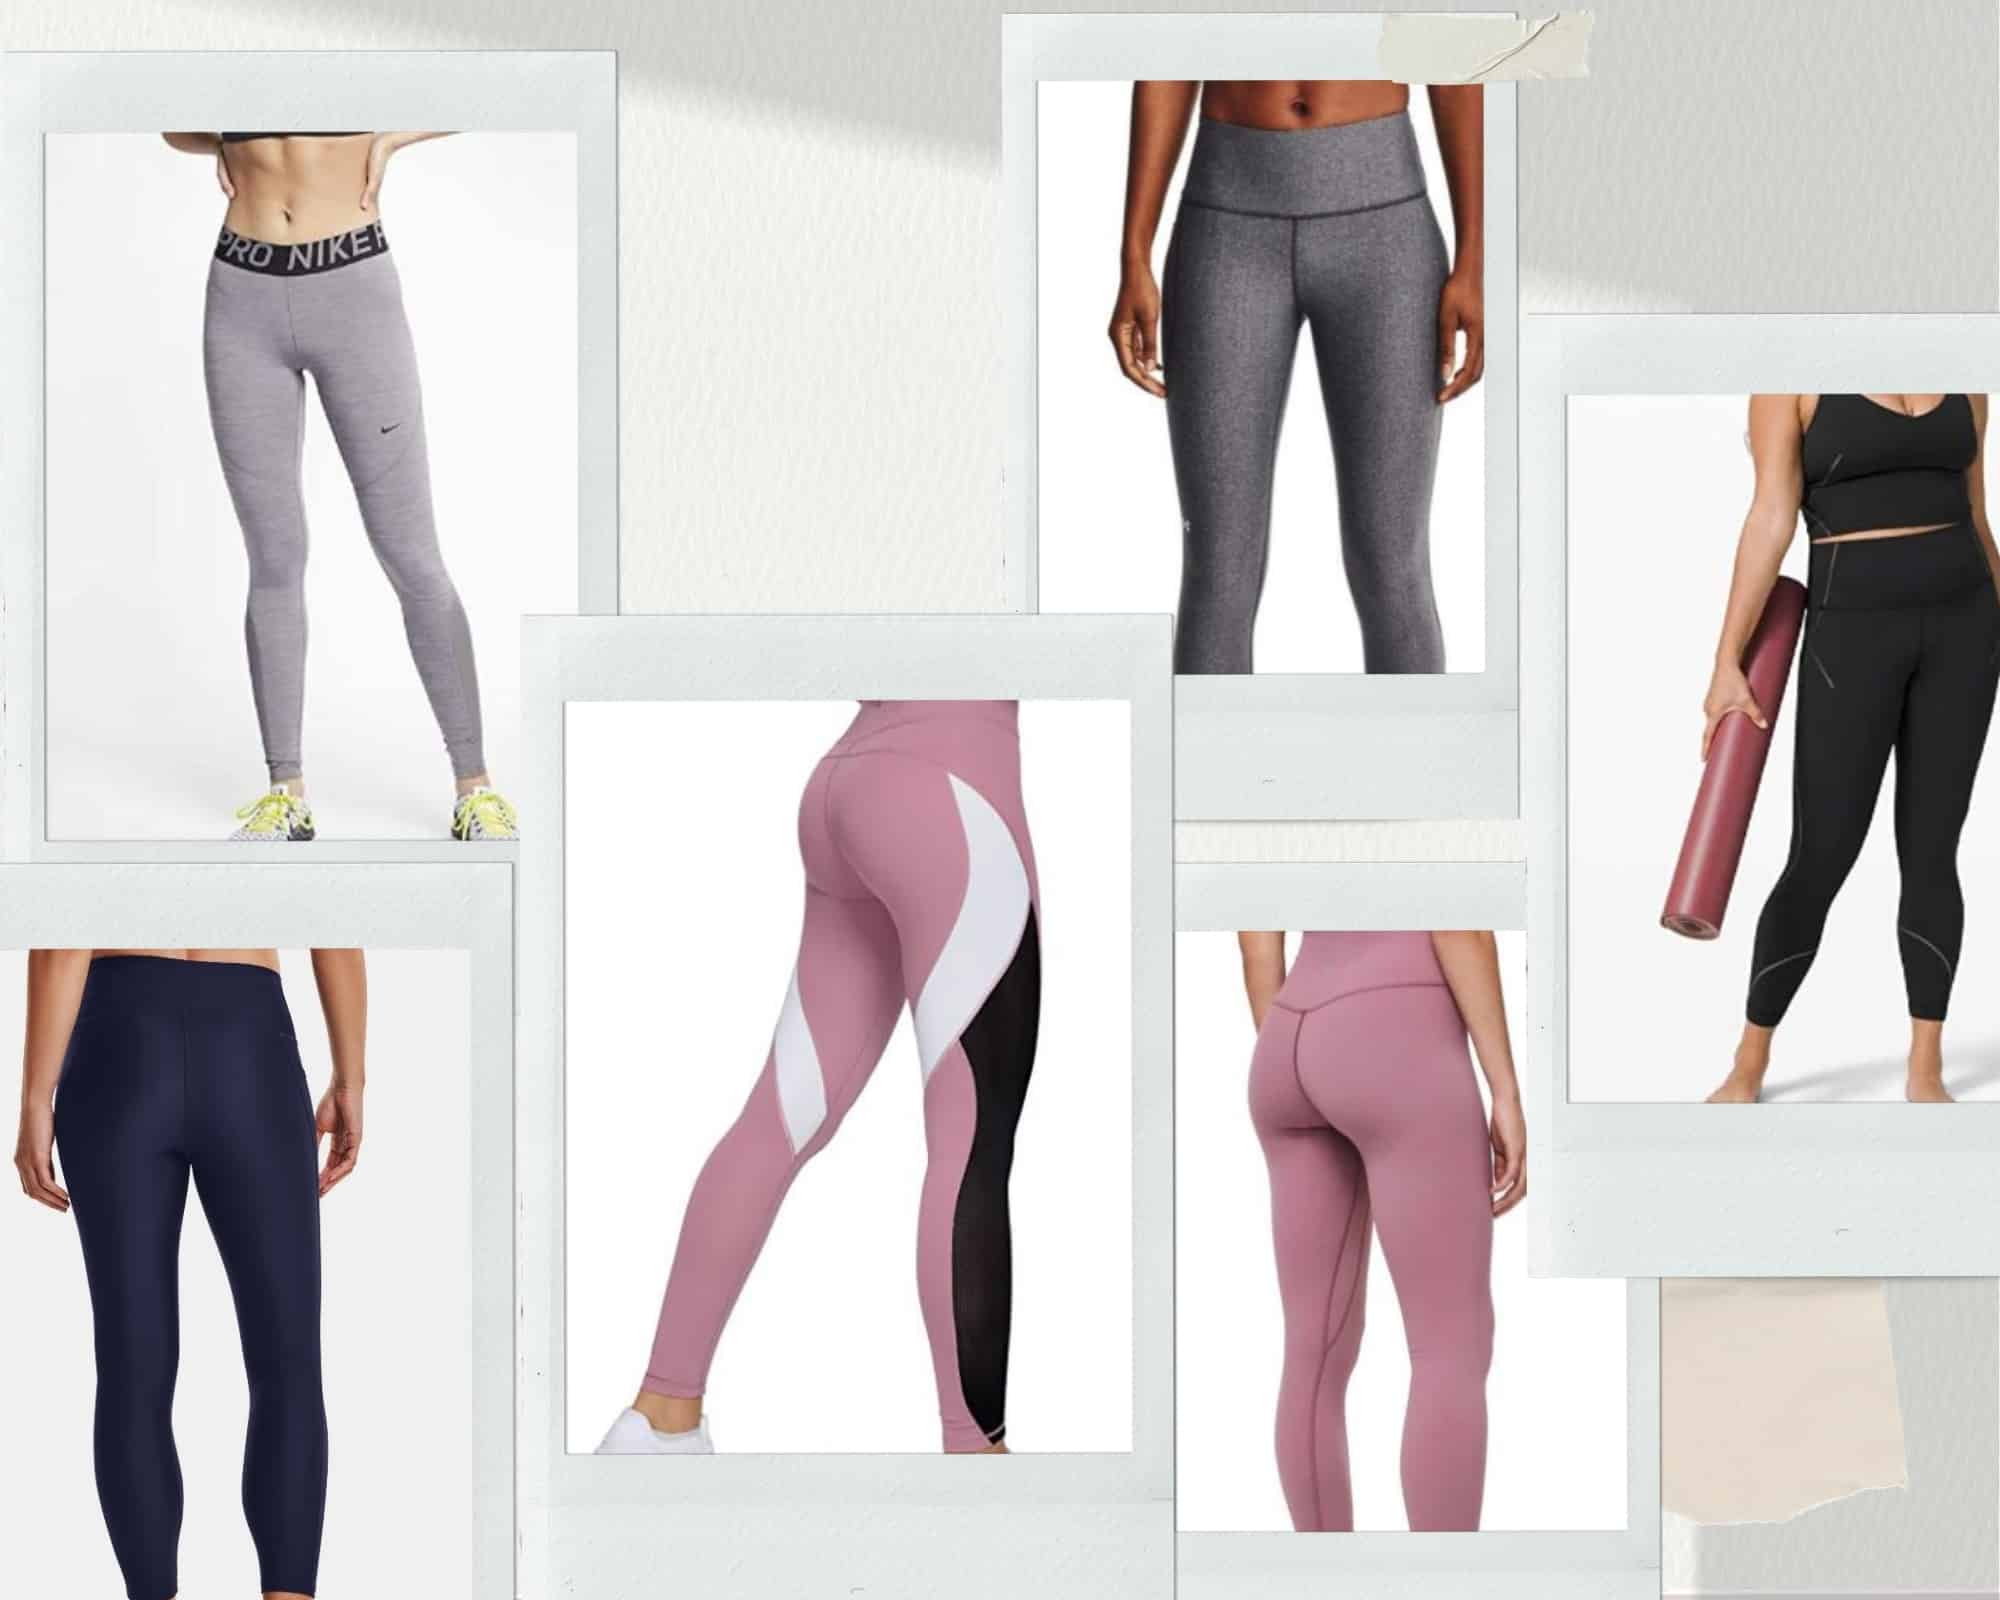 10 Best Non See Through Workout Leggings According To Customers